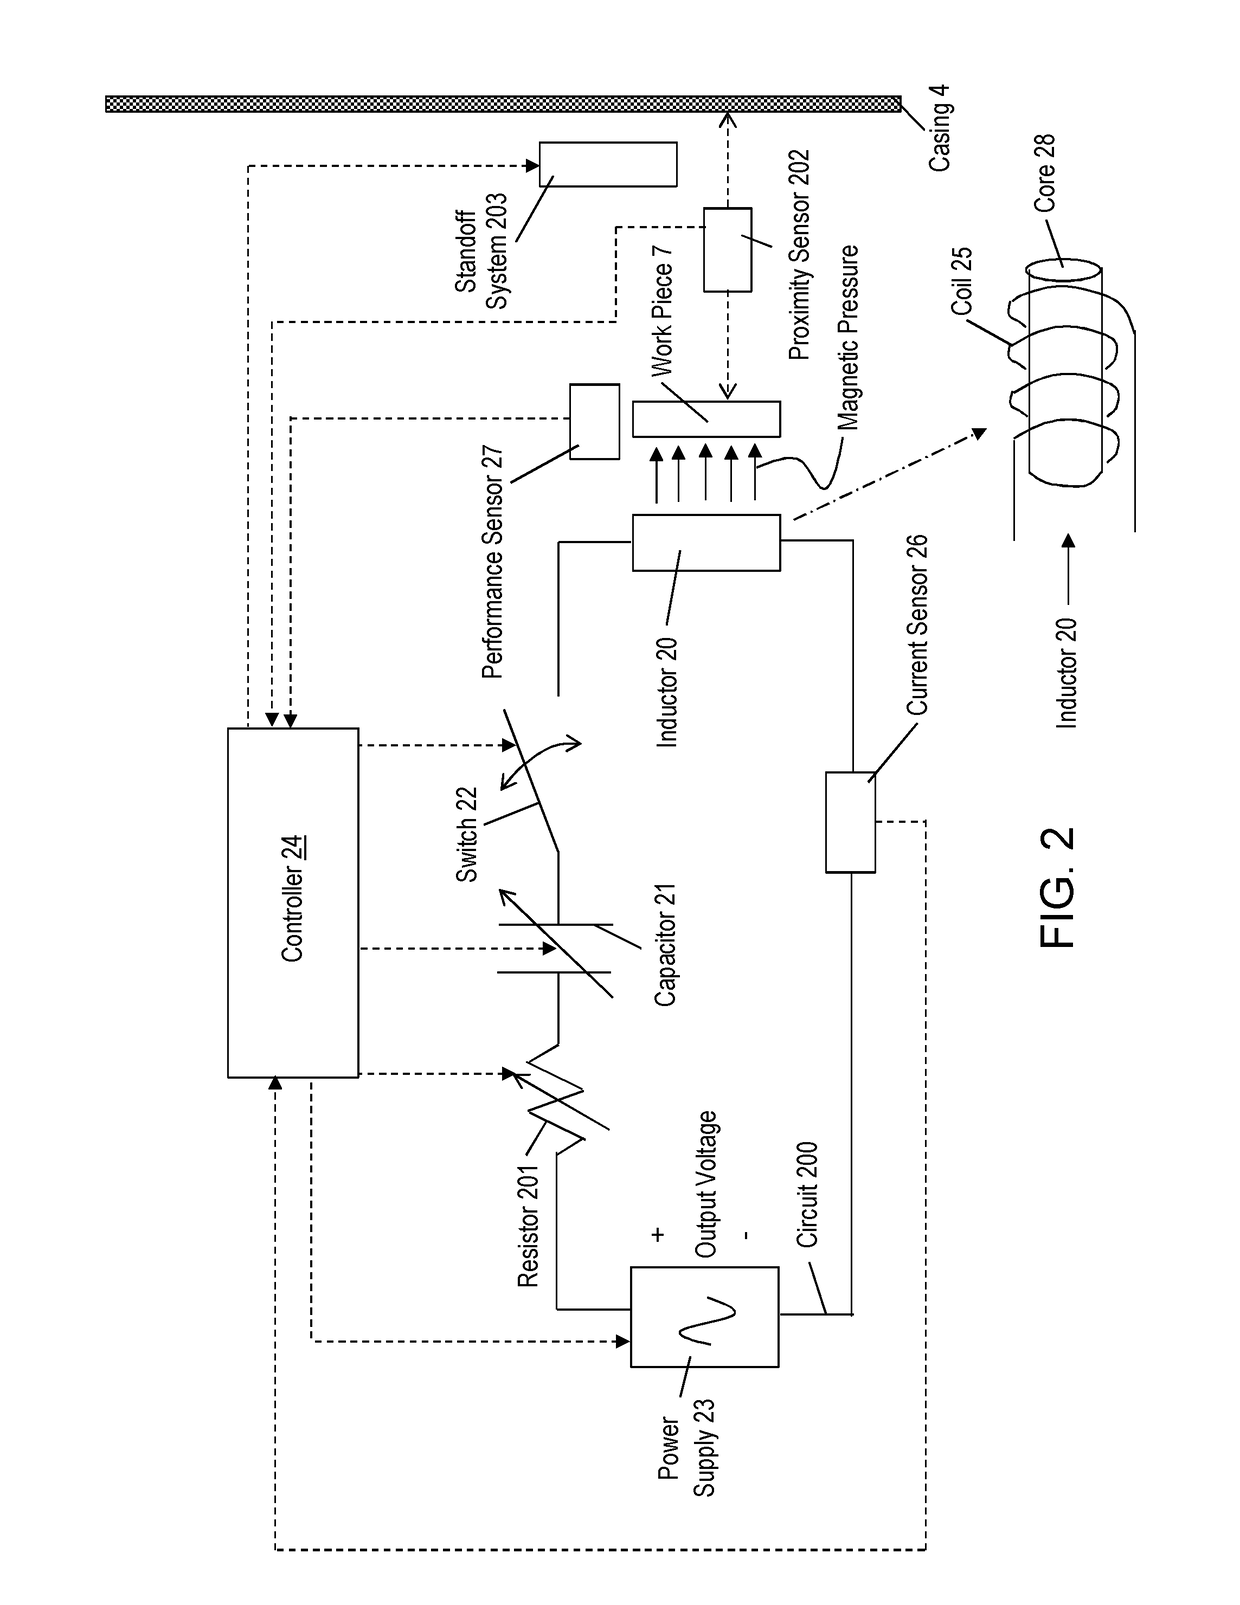 Frequency modulation for magnetic pressure pulse tool